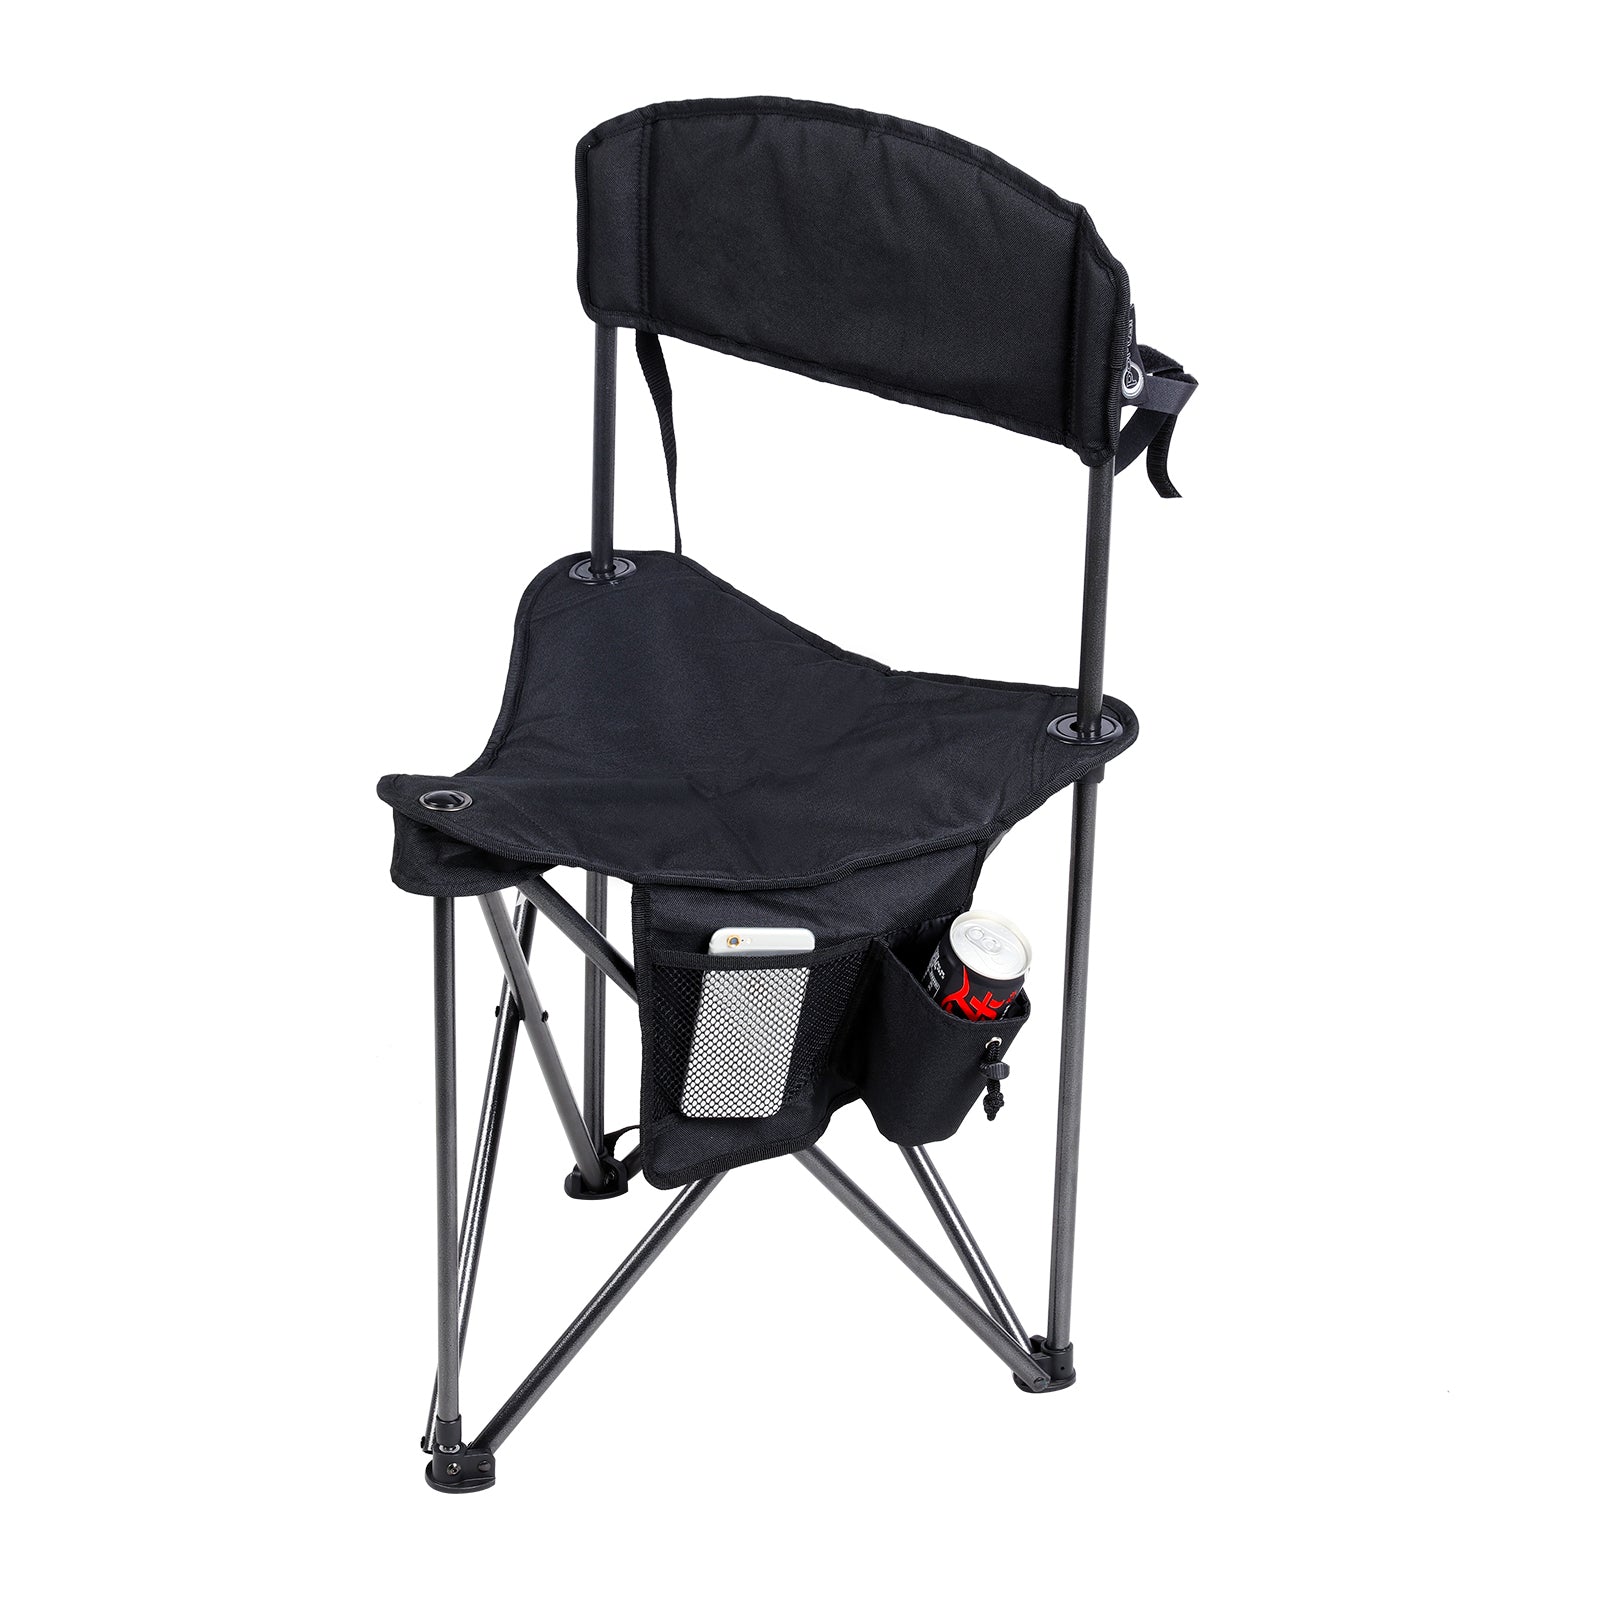 Reclining Fishing Chair, All Terrain Fishing Chair Fishing Chair Camping  Chair Heavy Duty with Adjustable Front and Rear Legs,Black Gray,Set 3